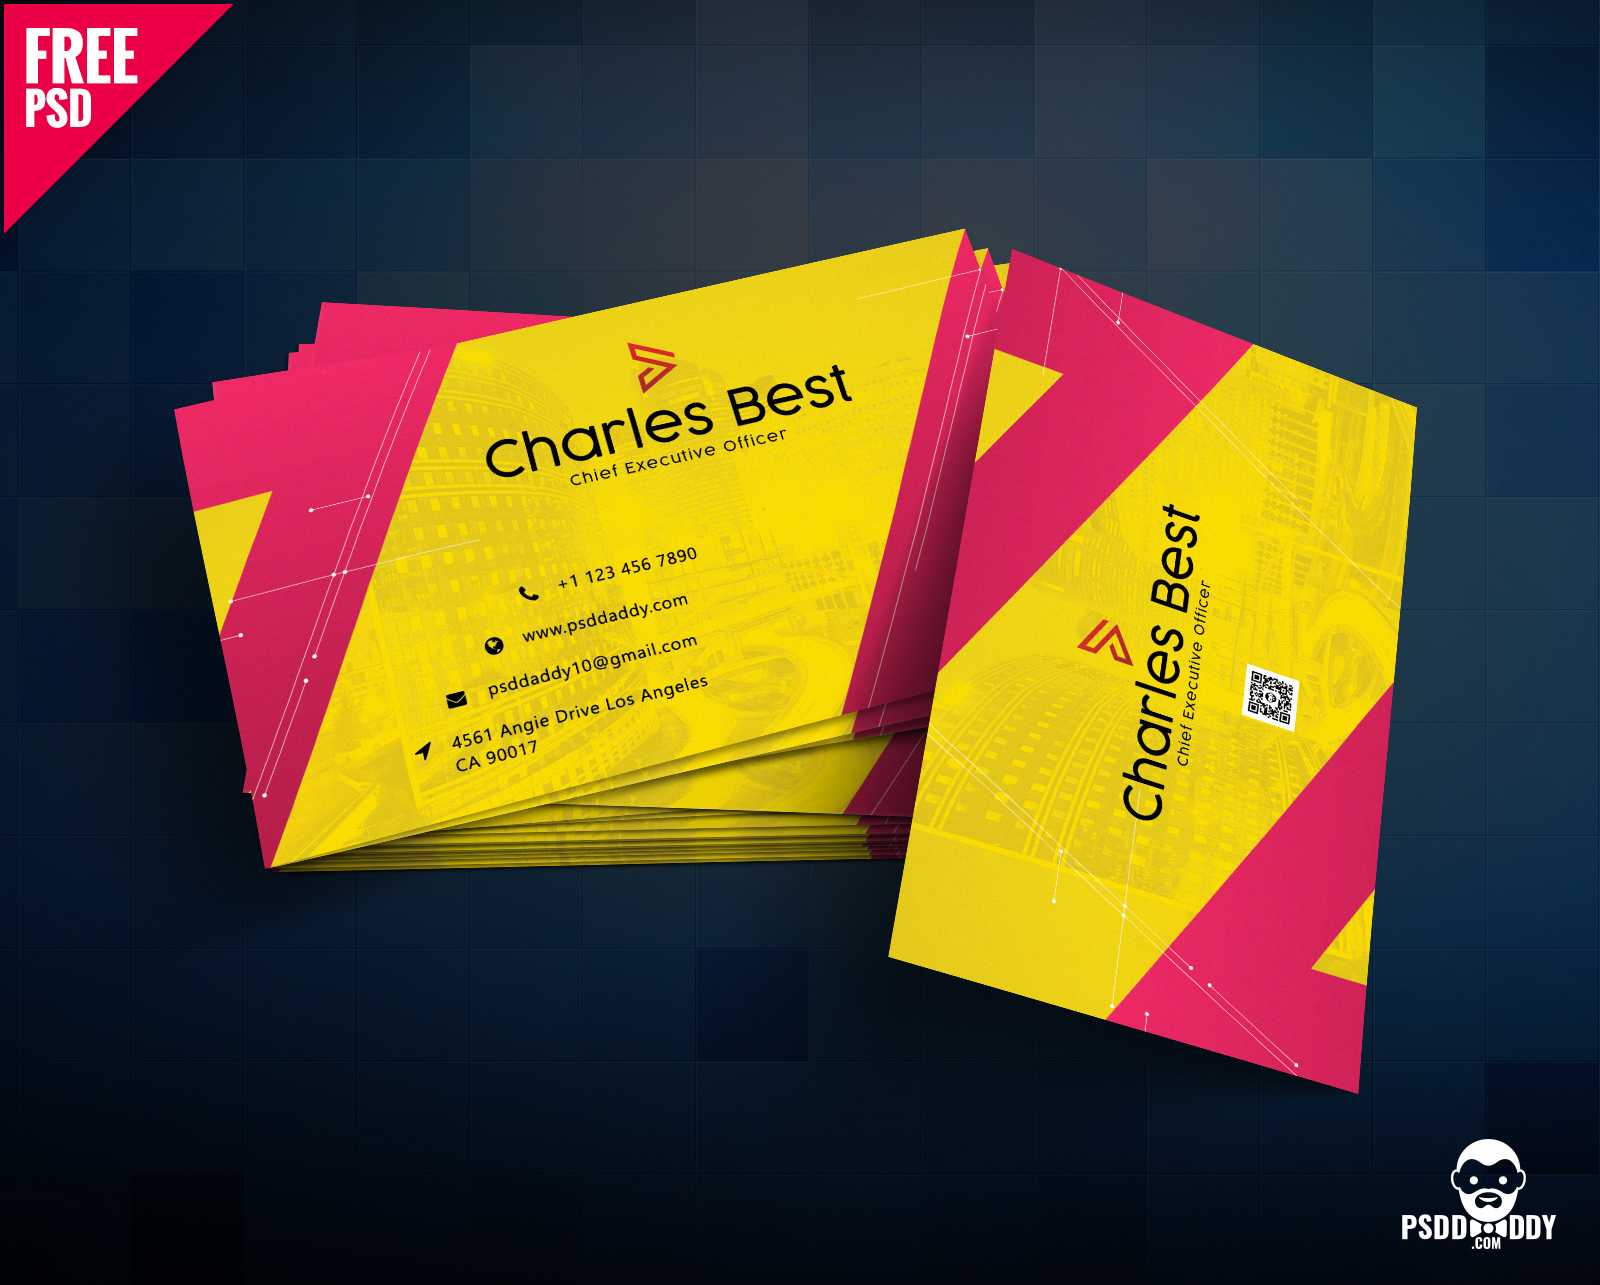 Download] Creative Business Card Free Psd | Psddaddy Throughout Visiting Card Psd Template